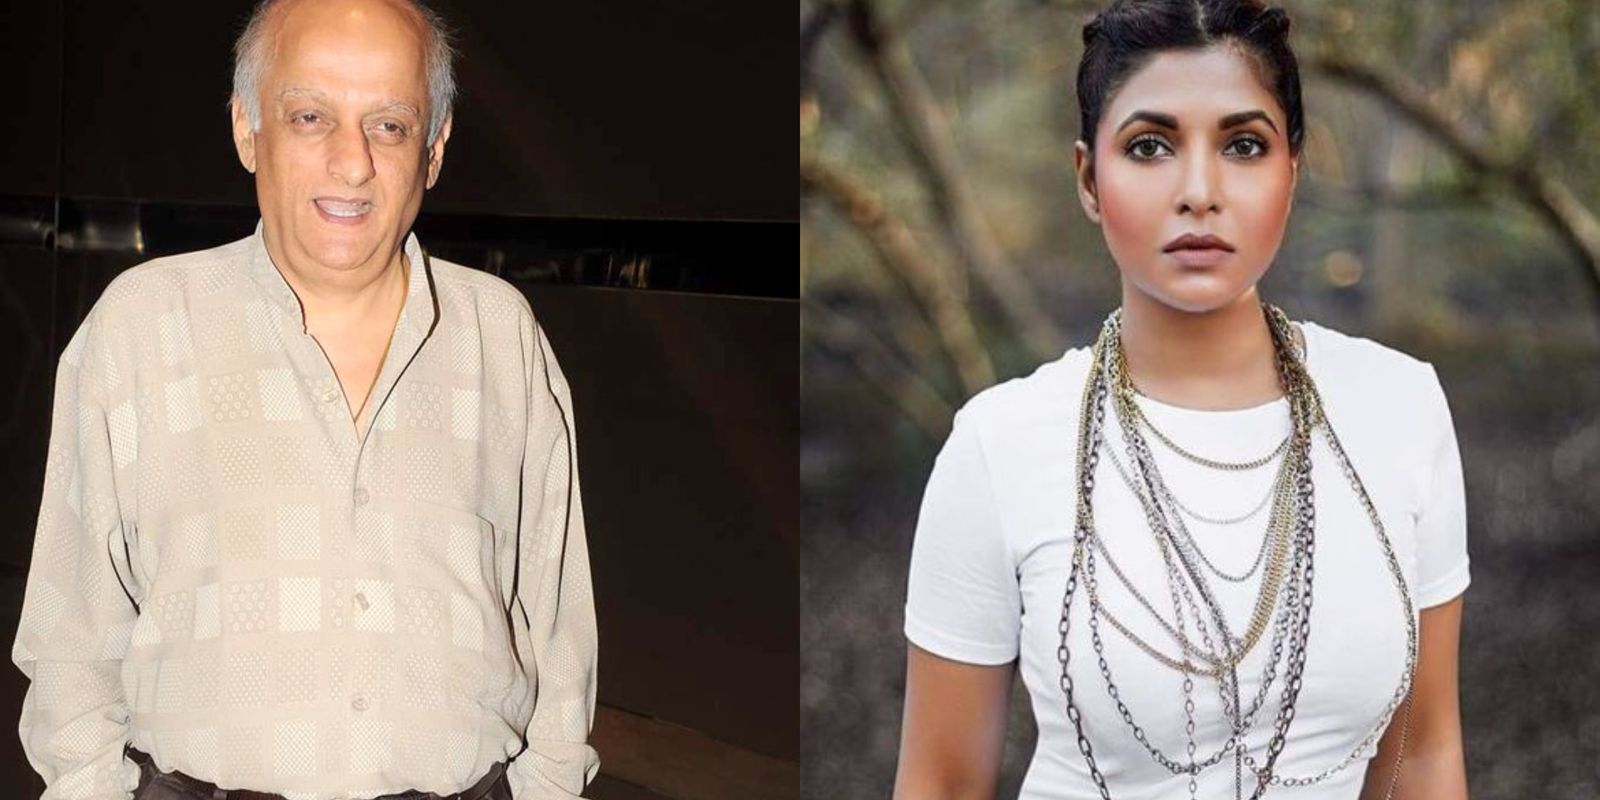 Mukesh Bhatt Reacts To Luviena Lodh’s Allegations With A Defamation Suit, States Sumit Sabharwal Only An Employee